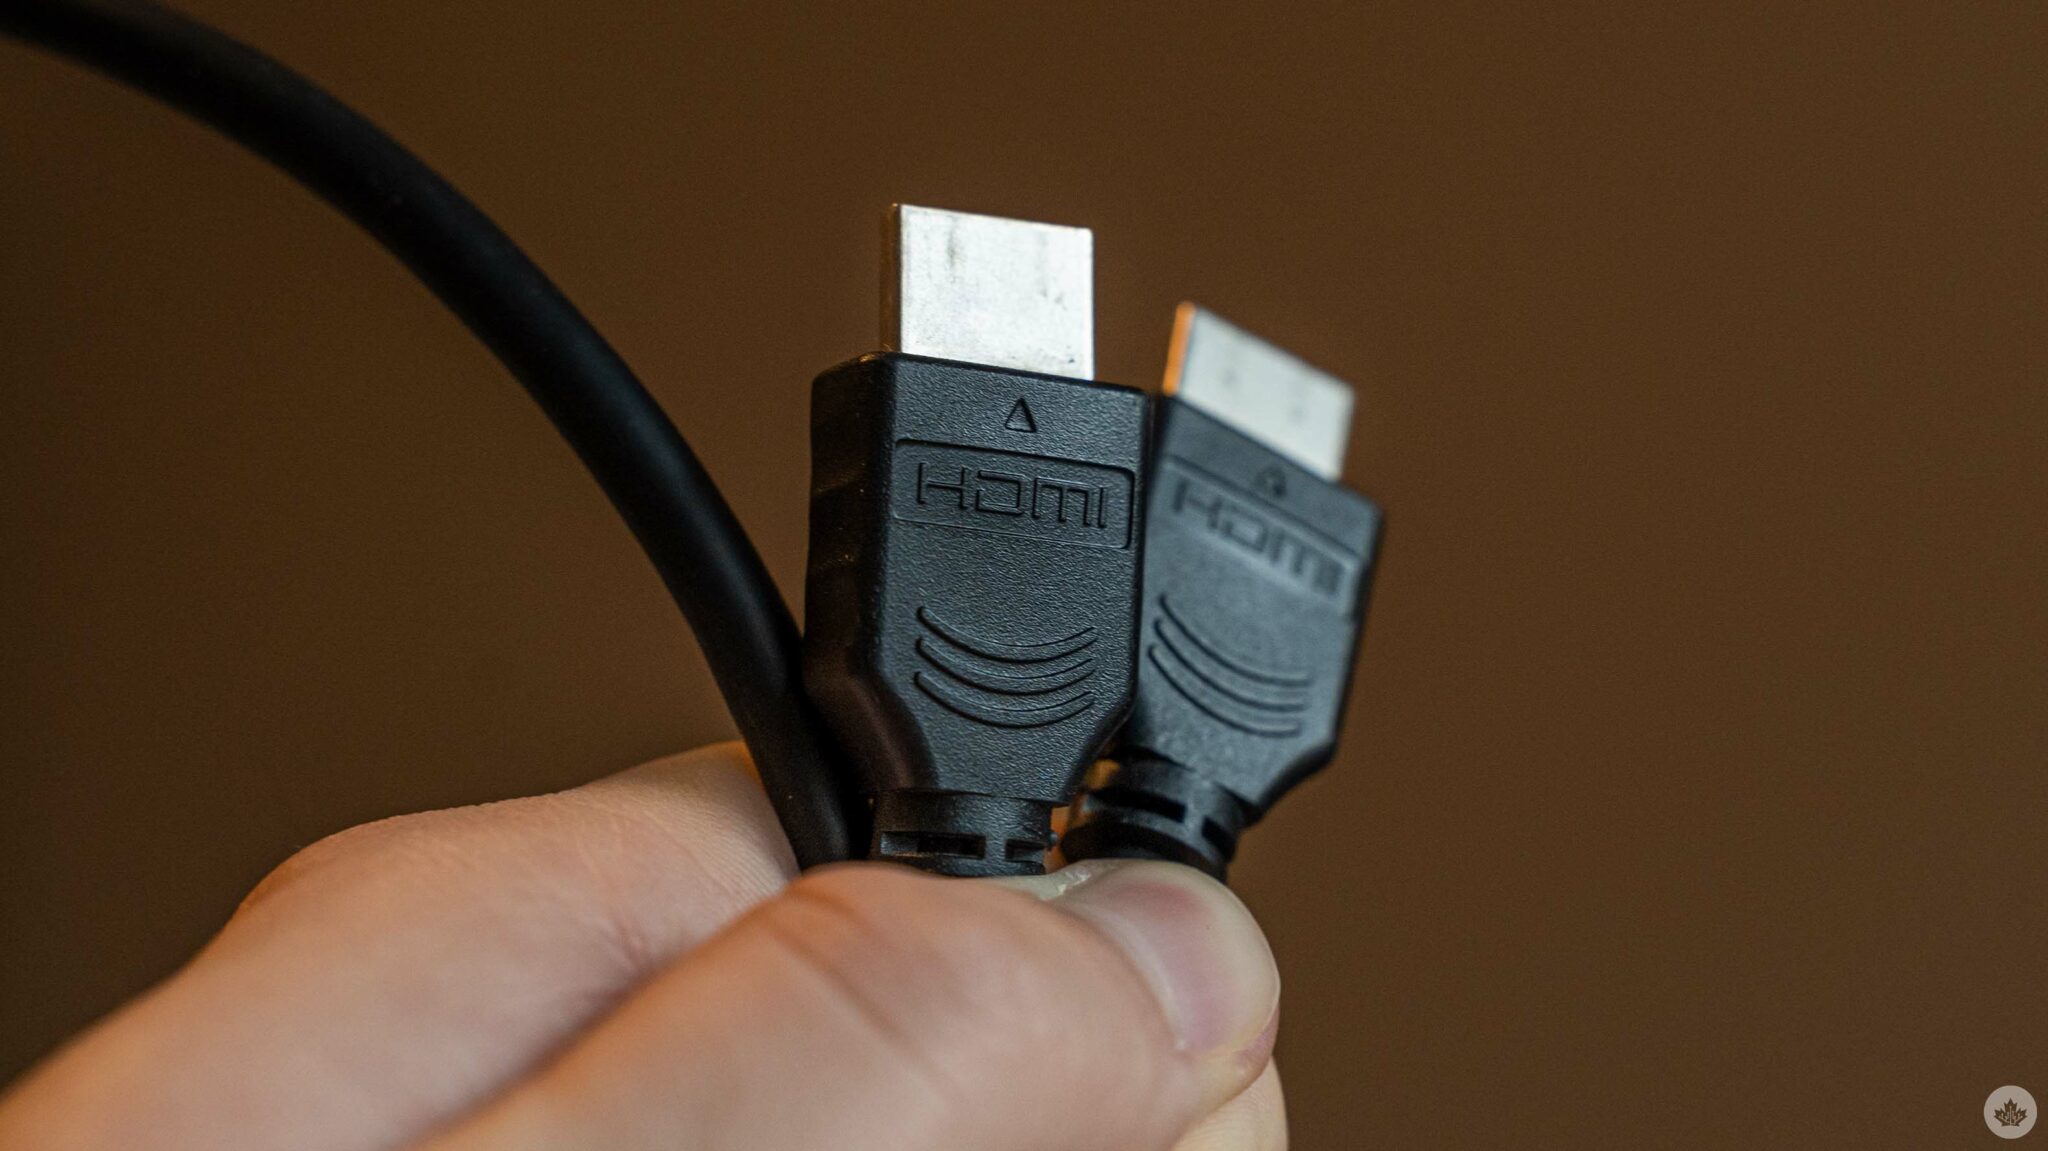 HDMI 2.1a is a confusing new spec arriving at CES 2022